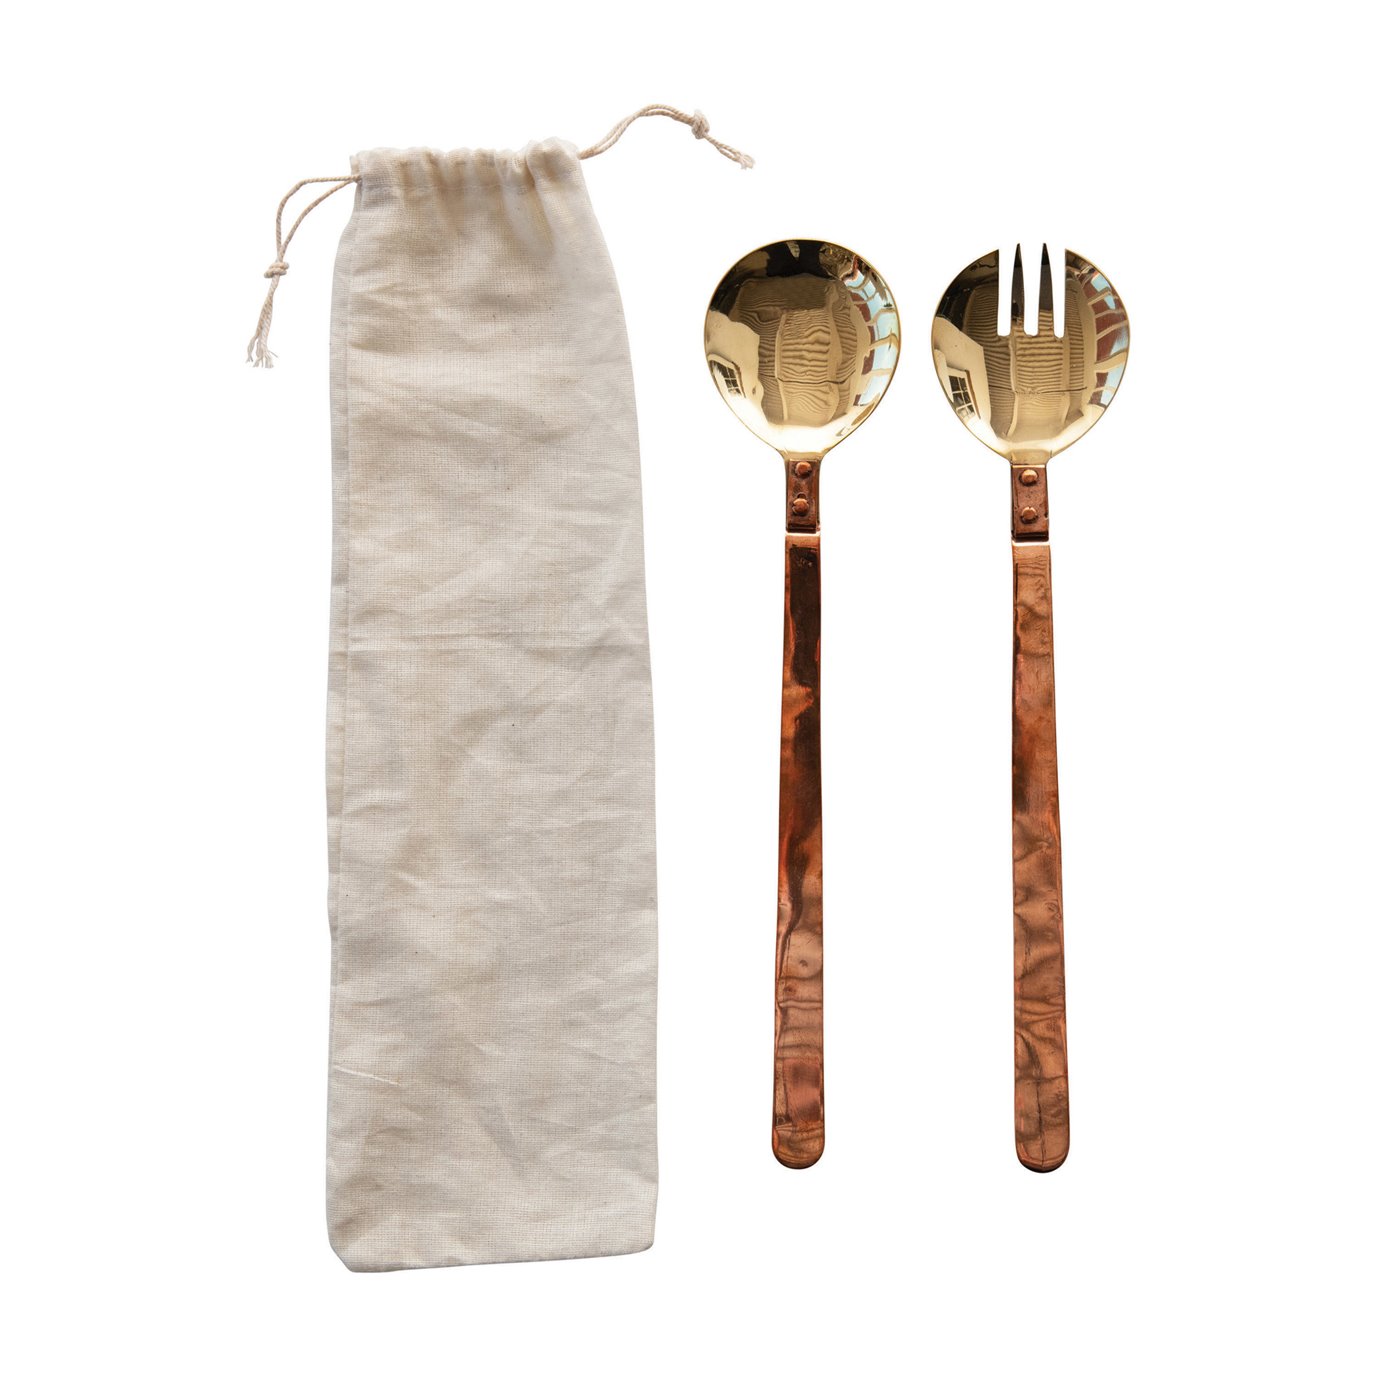 Brass Salad Servers with Copper Handles in Drawstring Bag, Set of 2